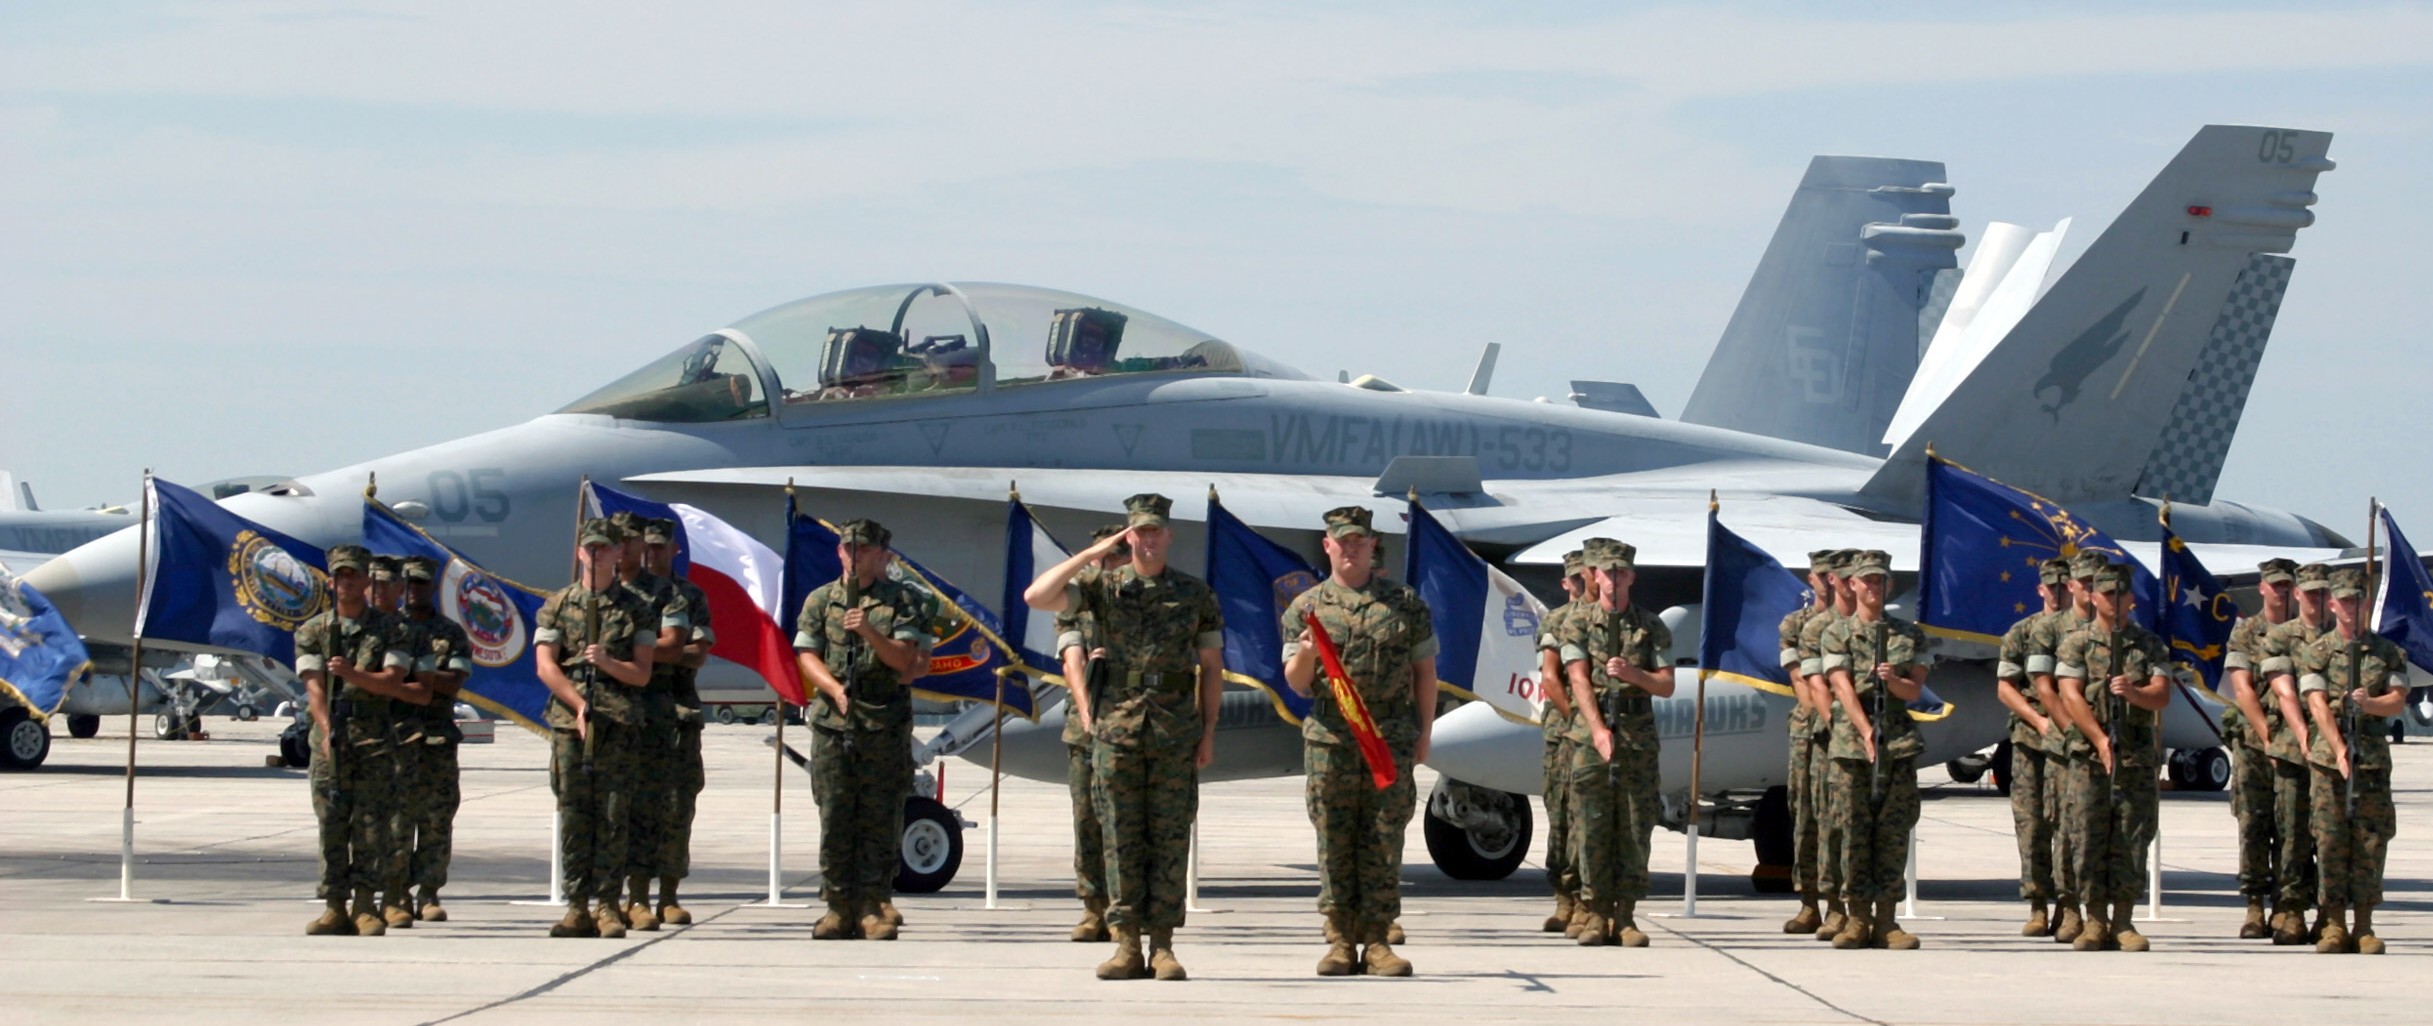 vmfa(aw)-533 hawks marine fighter attack squadron usmc f/a-18d hornet 07 change of command mcas beaufort